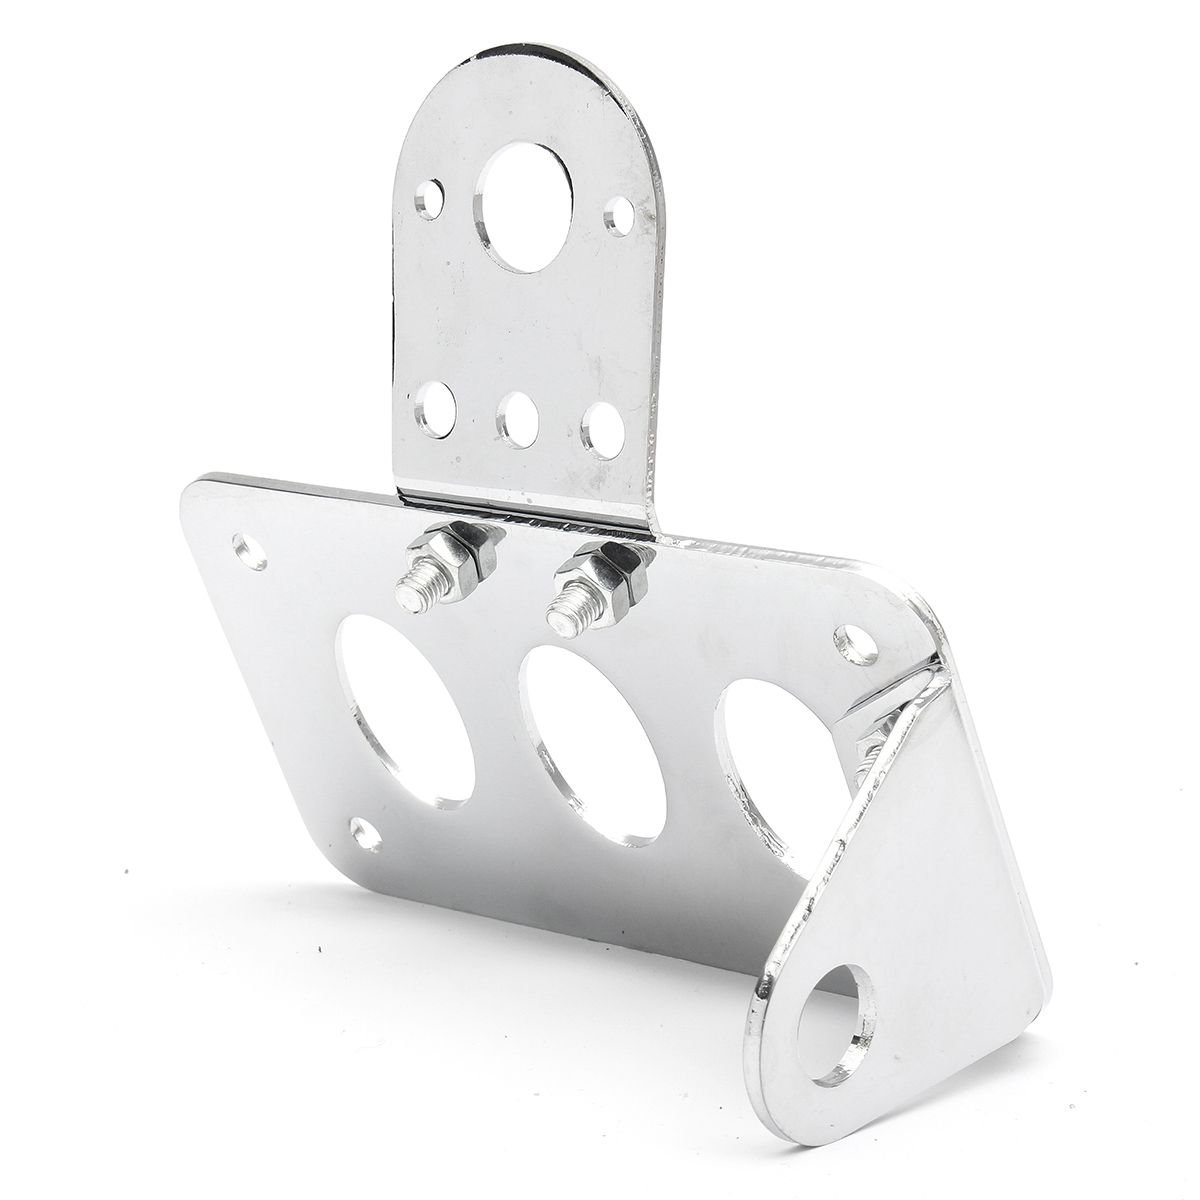 Taillight Side-Mount Bracket Motorcycle License Plate for Harley Chopper